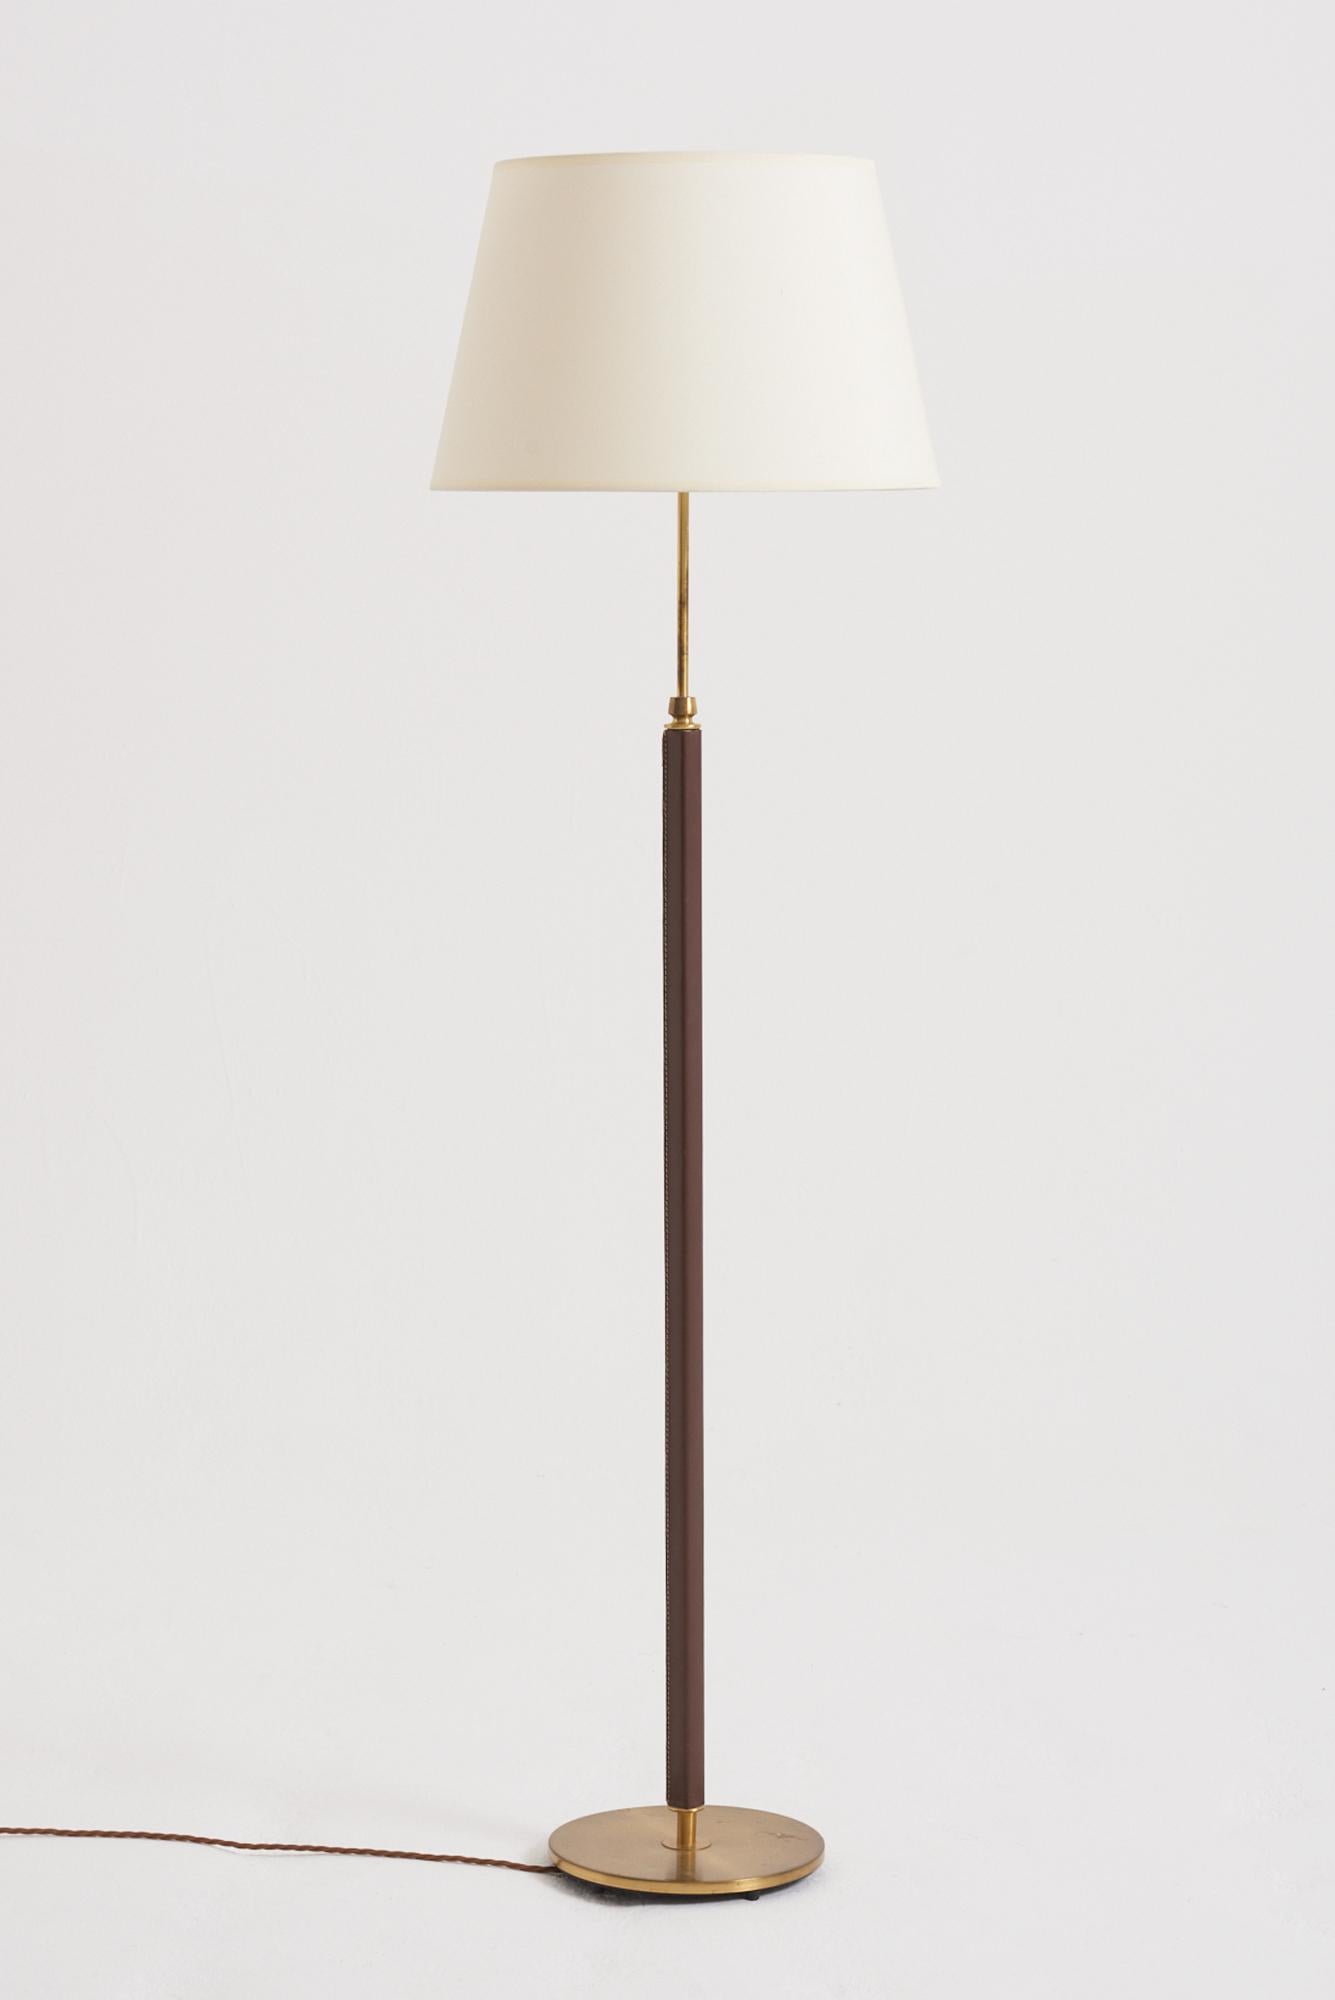 A brass and faux brown leather floor lamp by Falkenbergs Belysning. Sweden, third quarter of the 20th Century
With the shade: 142 cm high by 41 cm diameter
Lamp base only: 123 cm high by 23 cm diameter